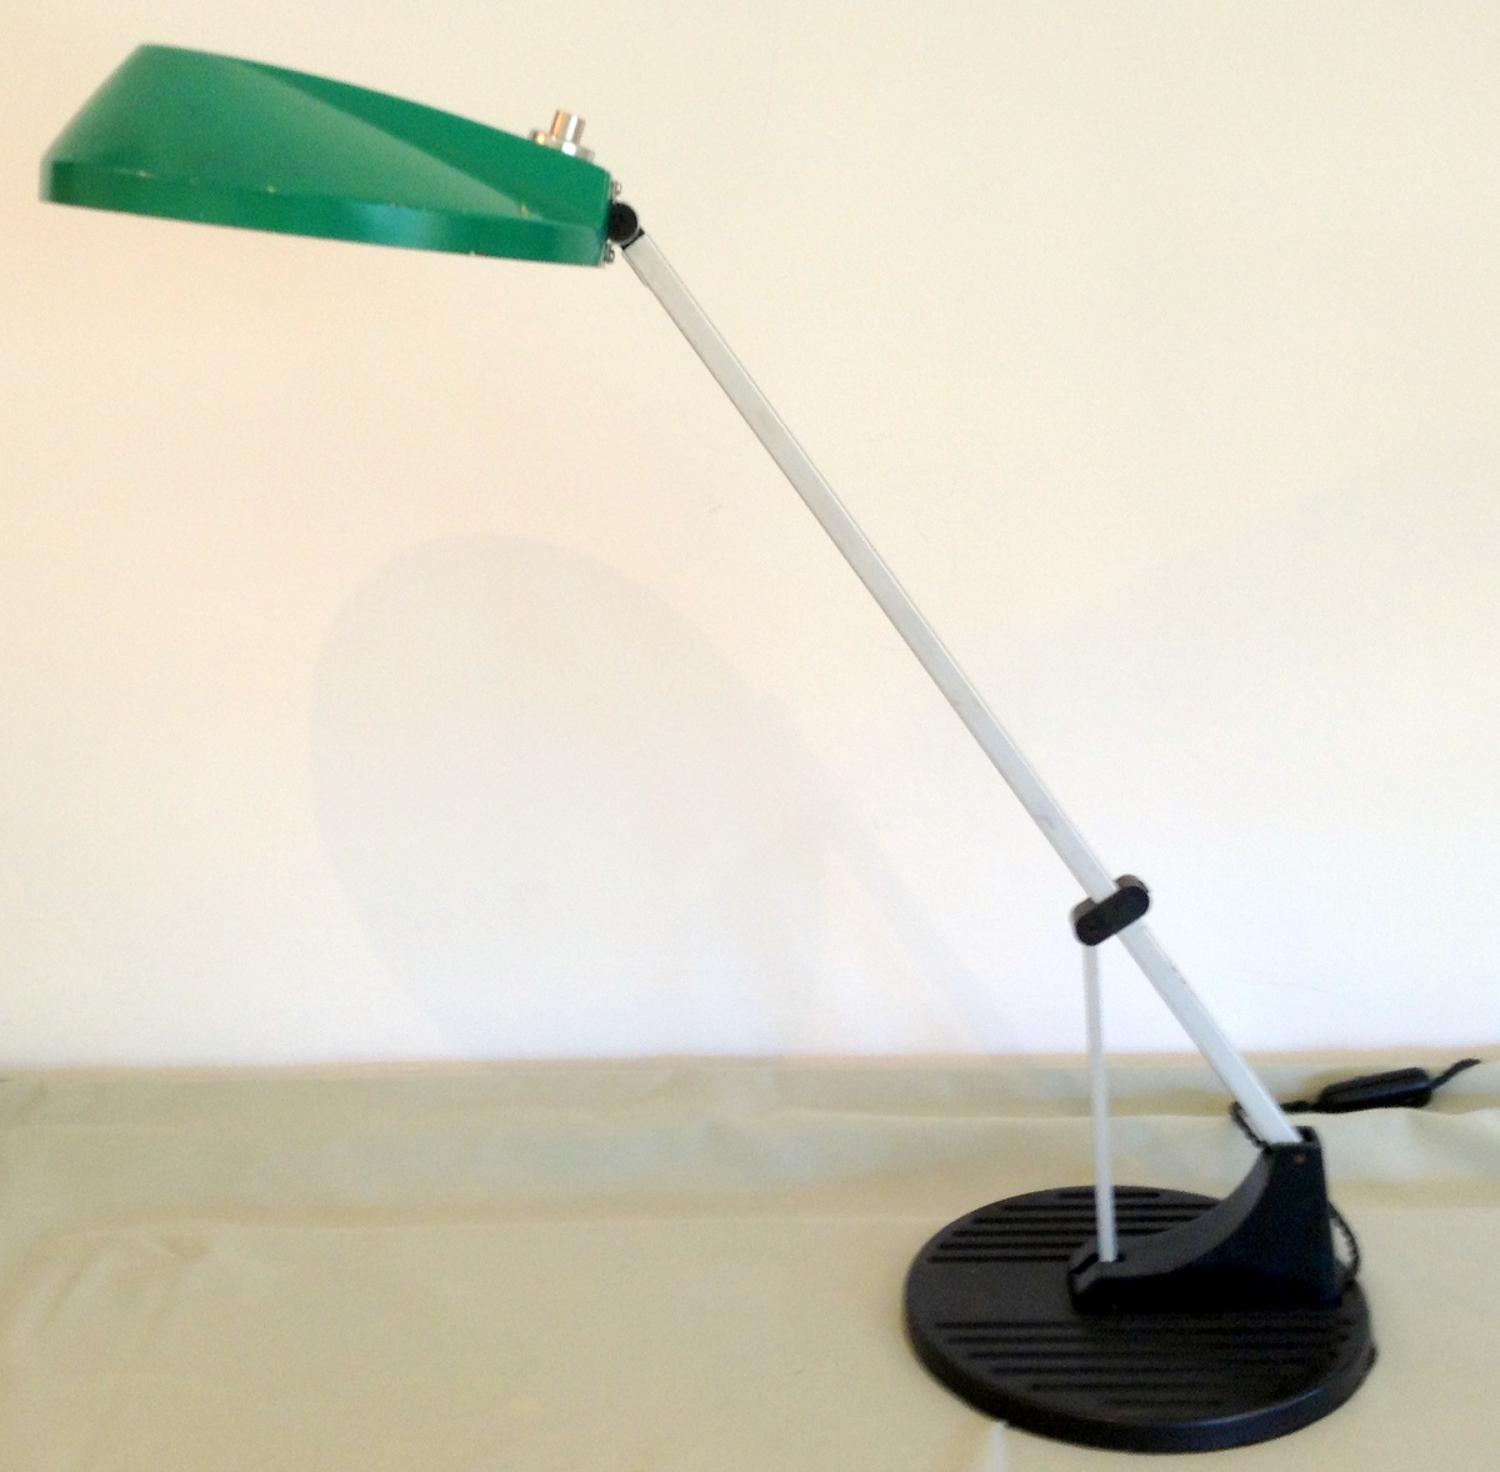 Green and black anglepoise